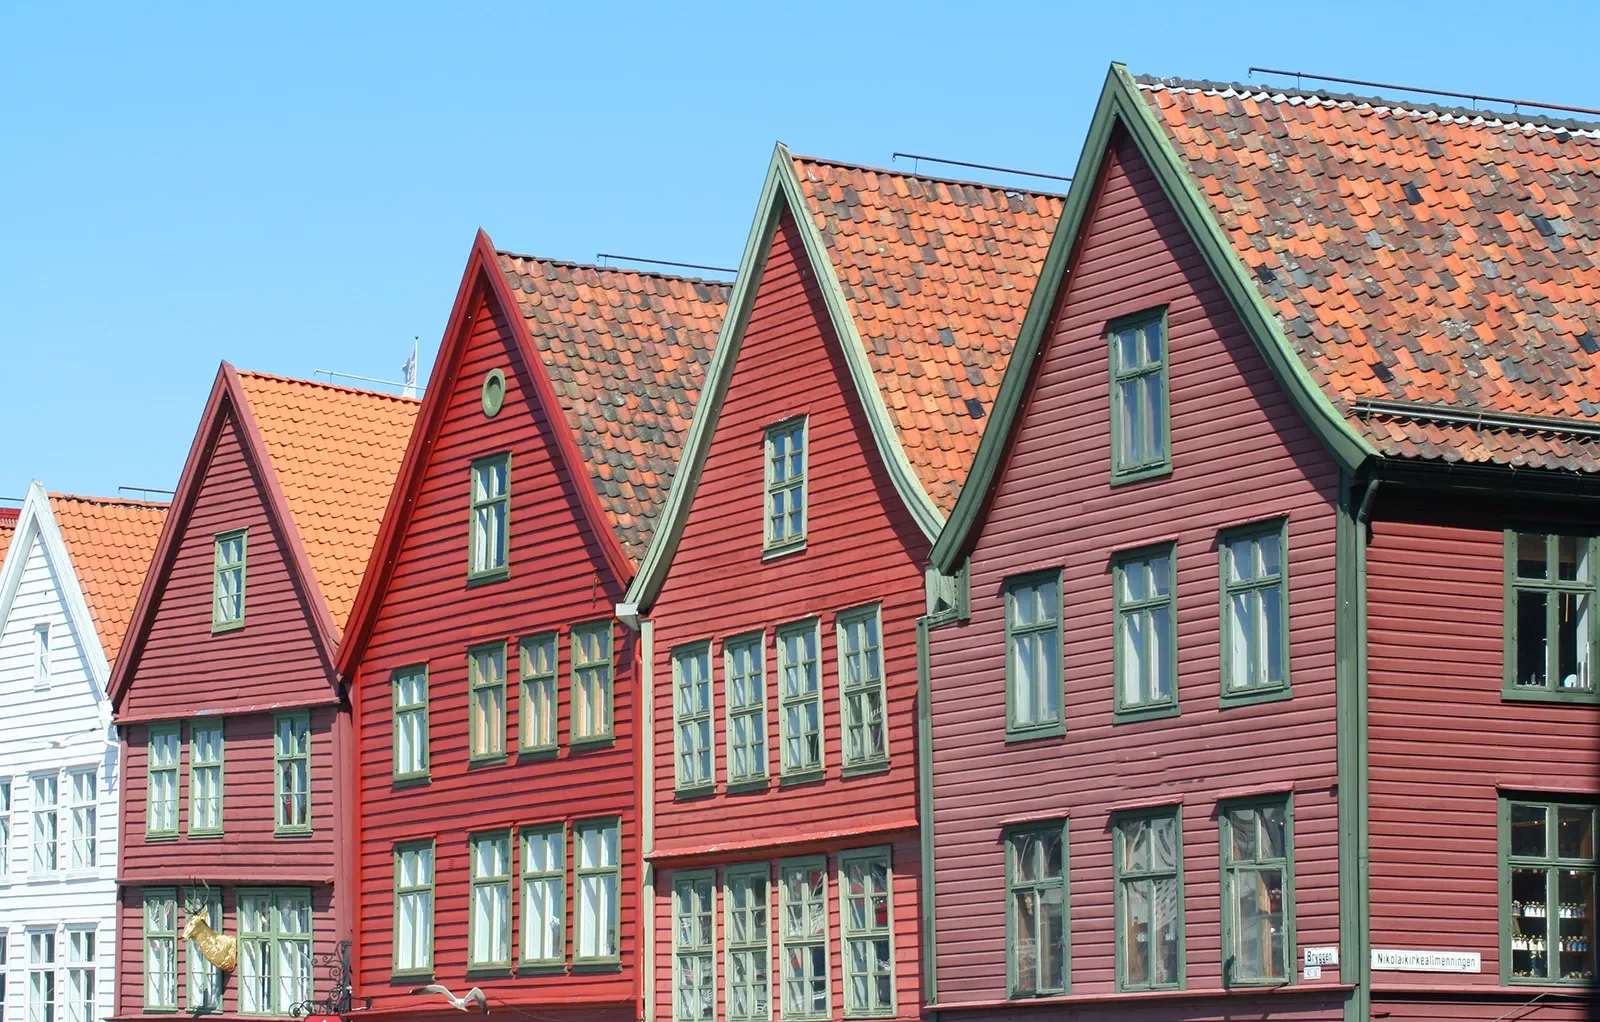 Rooftops of traditional homes in Norway